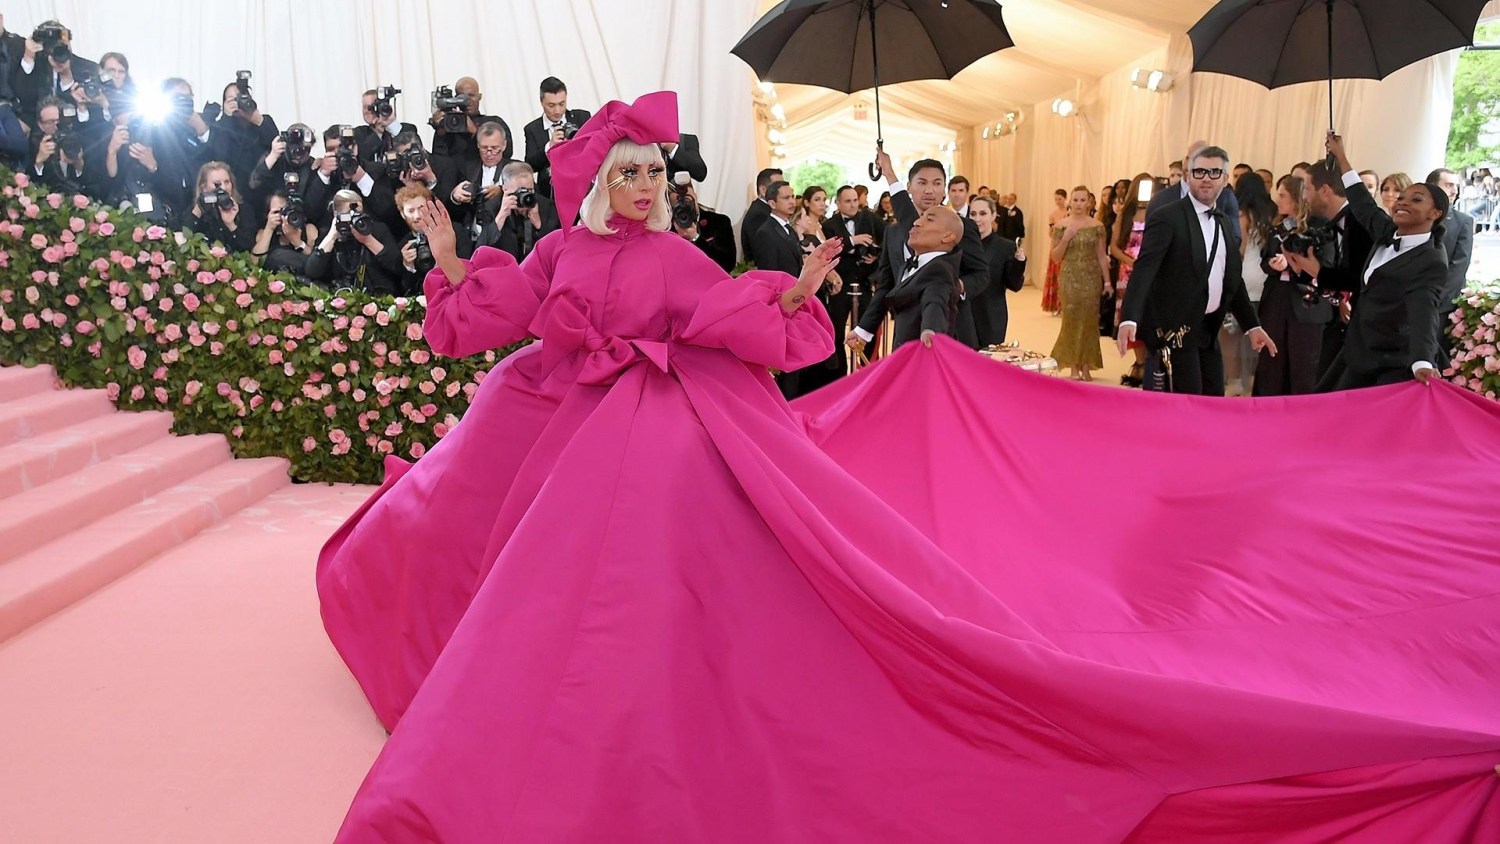 The Theme and Host of the Met Gala 2019 Couldn't Be More Perfect